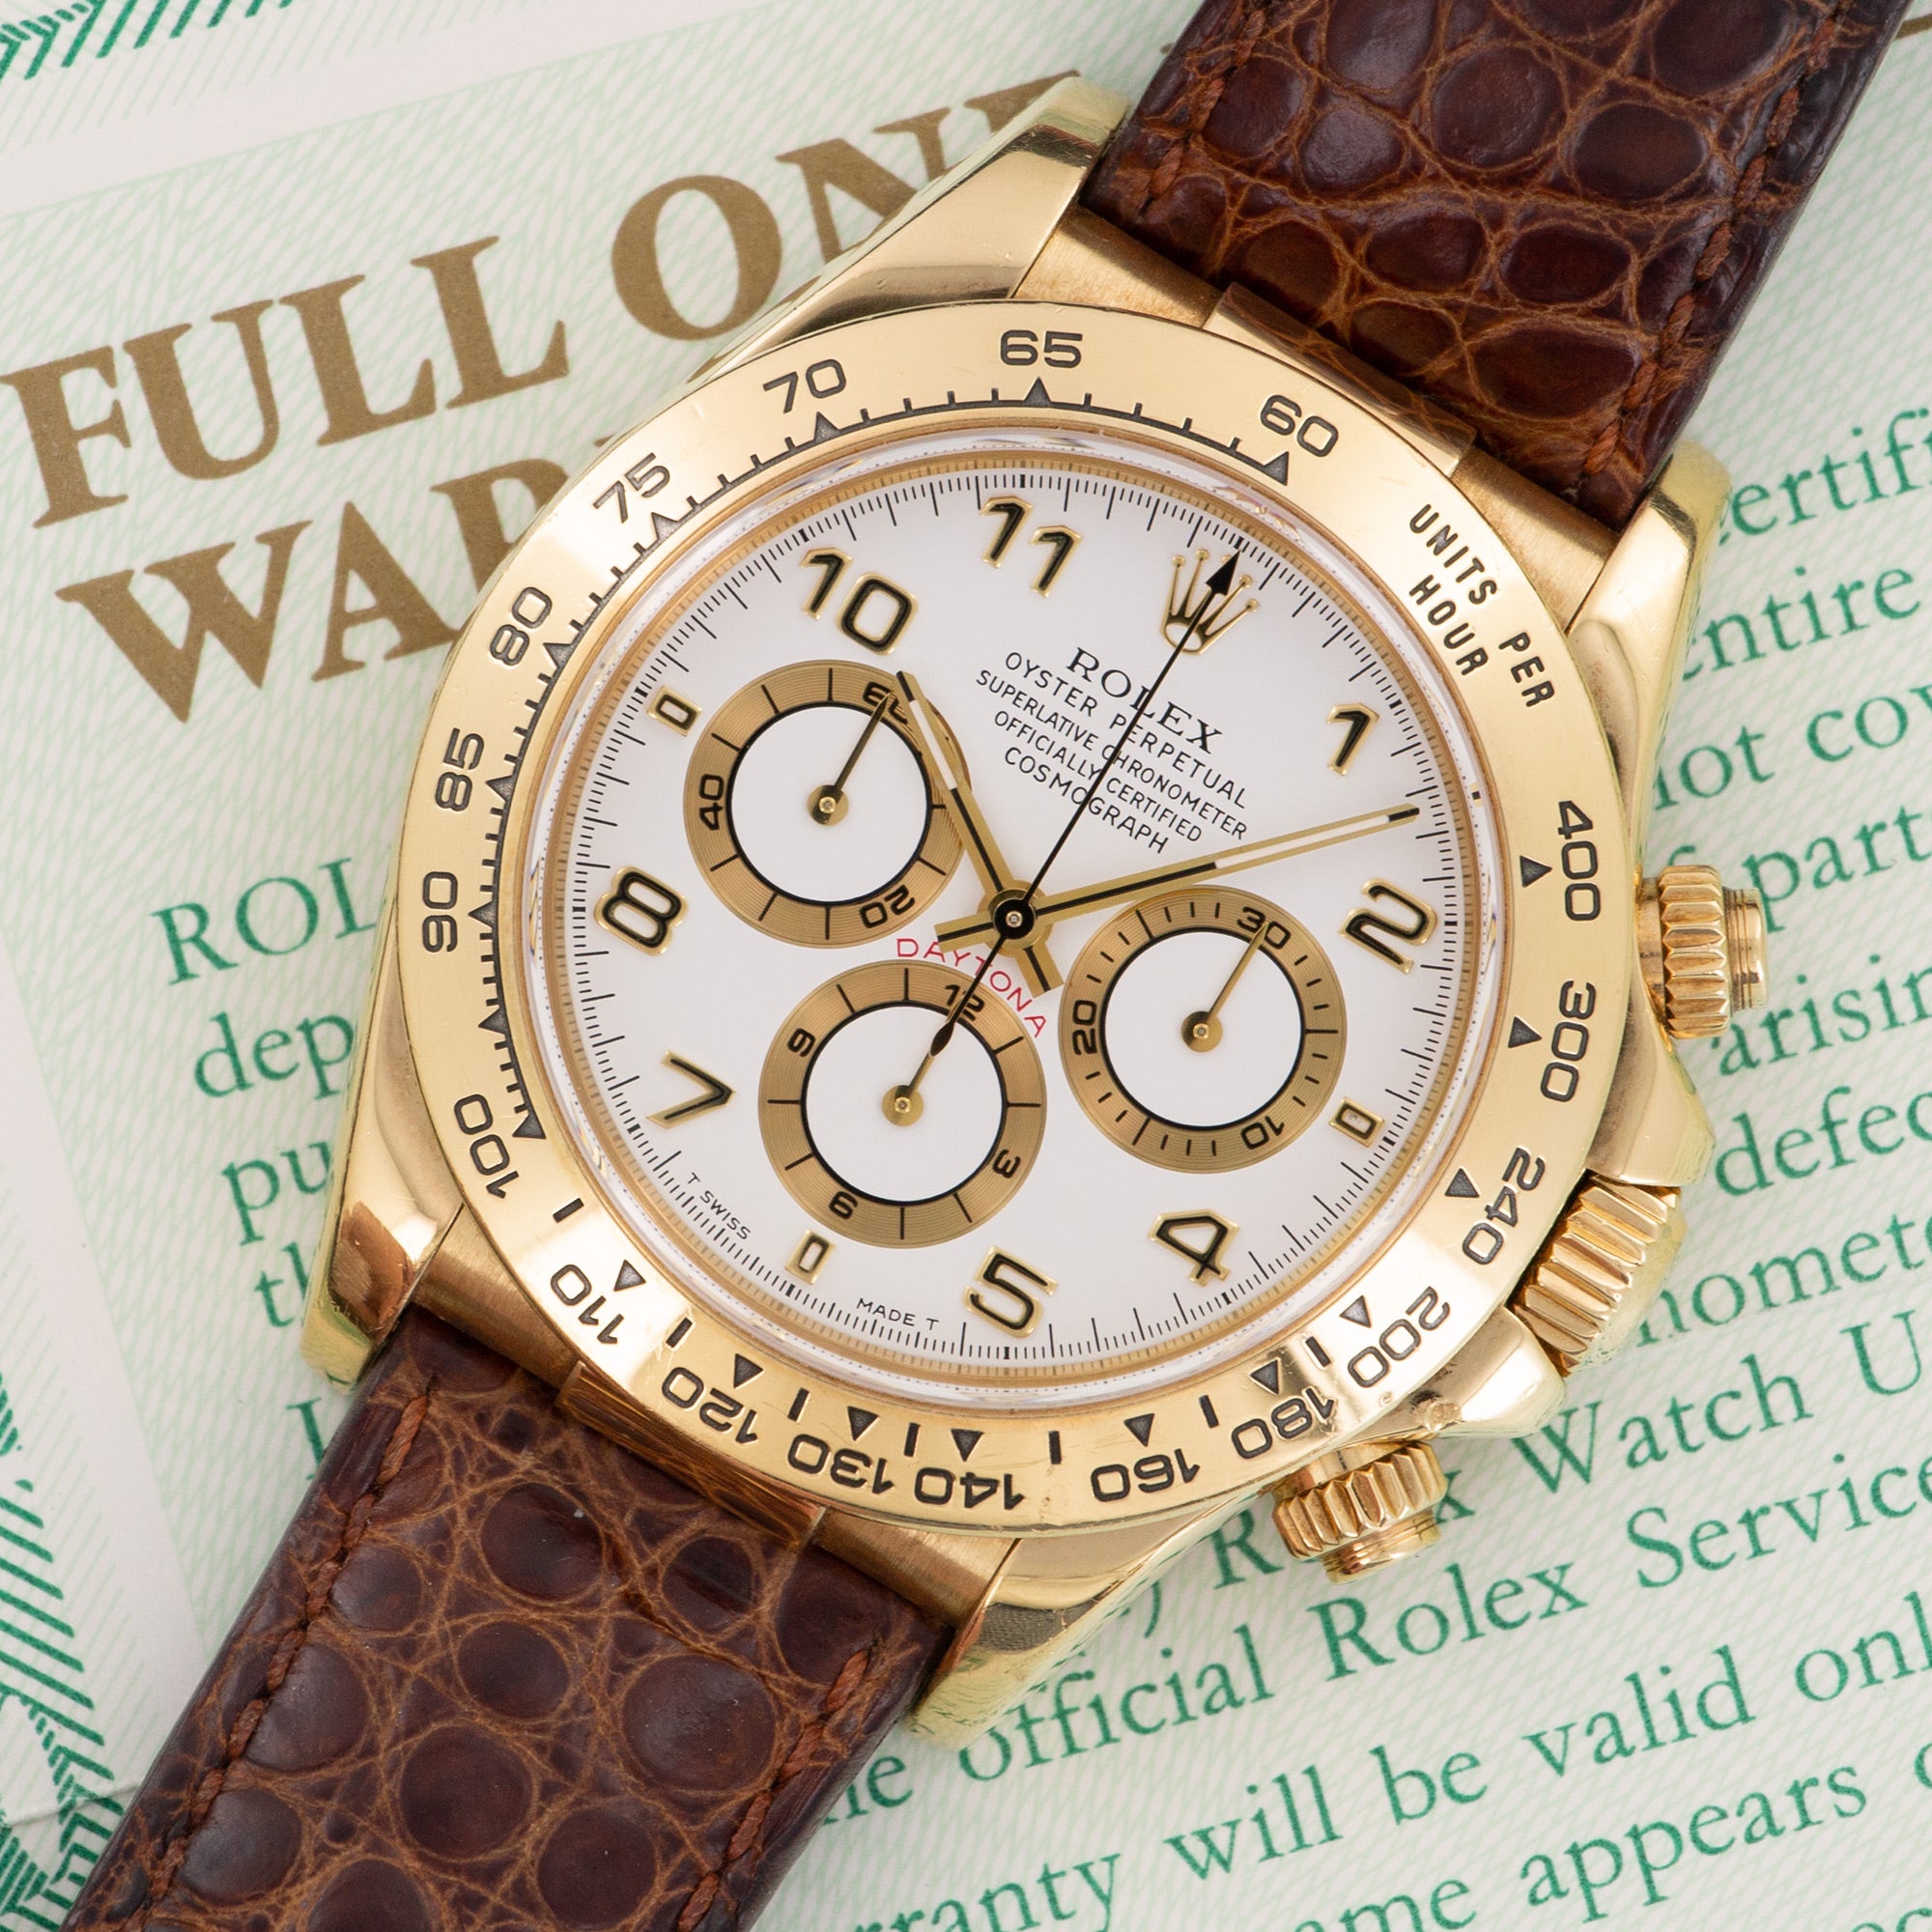 Rolex - Rolex Yellow Gold Zenith Cosmograph Daytona Watch, Ref 16518 with Original Box and Papers - The Keystone Watches